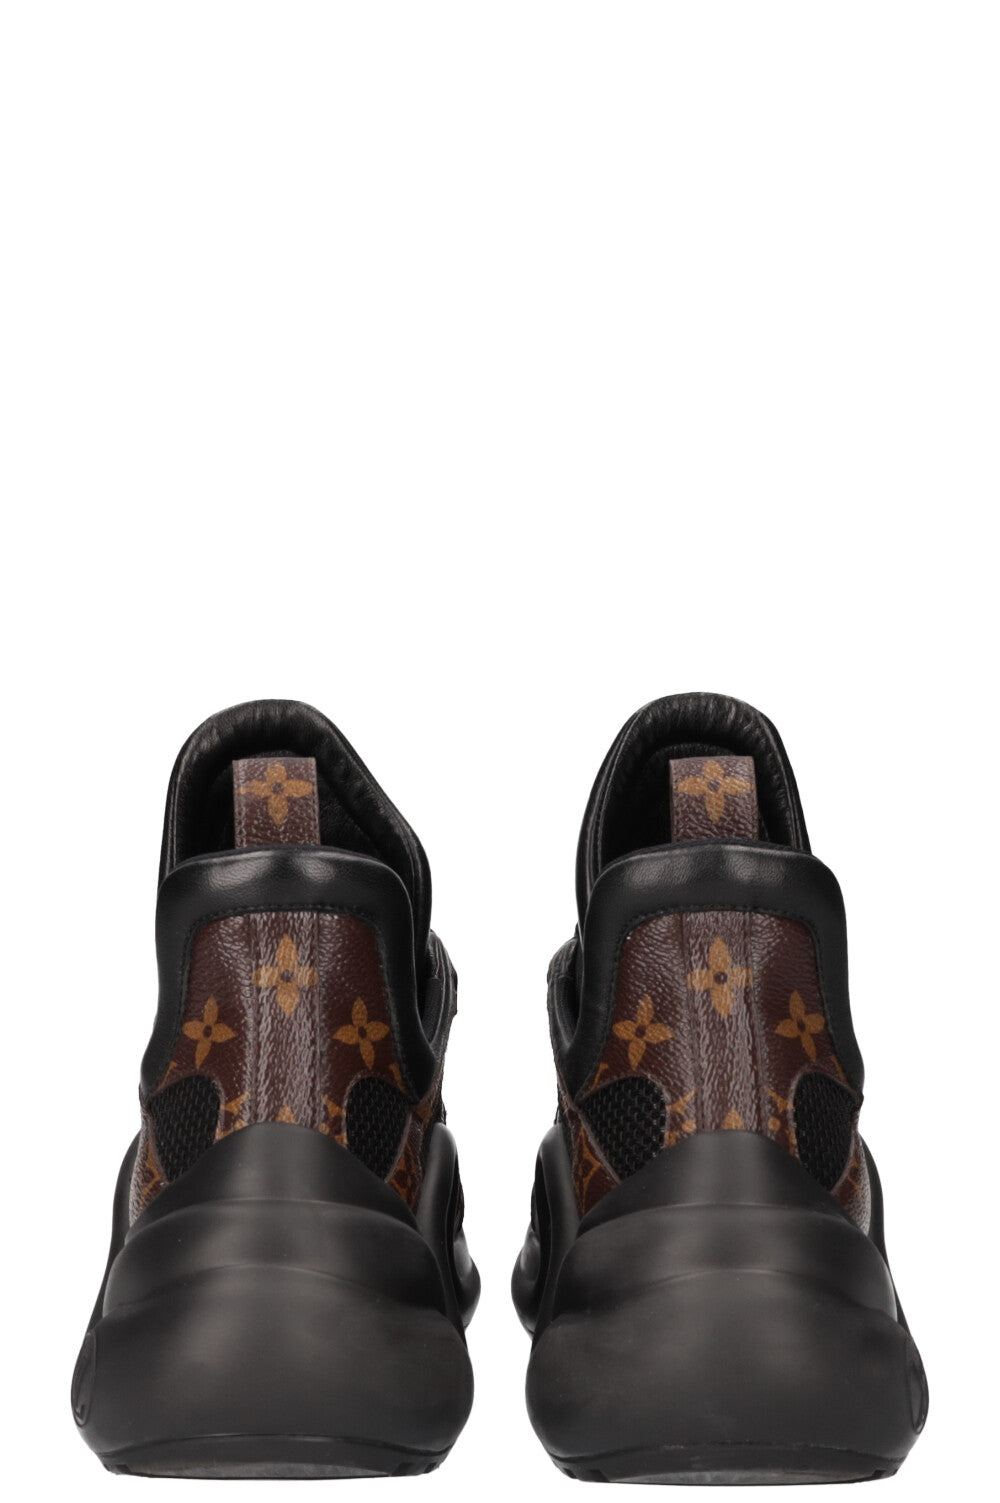 LOUIS VUITTON Archlight Sneakers MNG Black